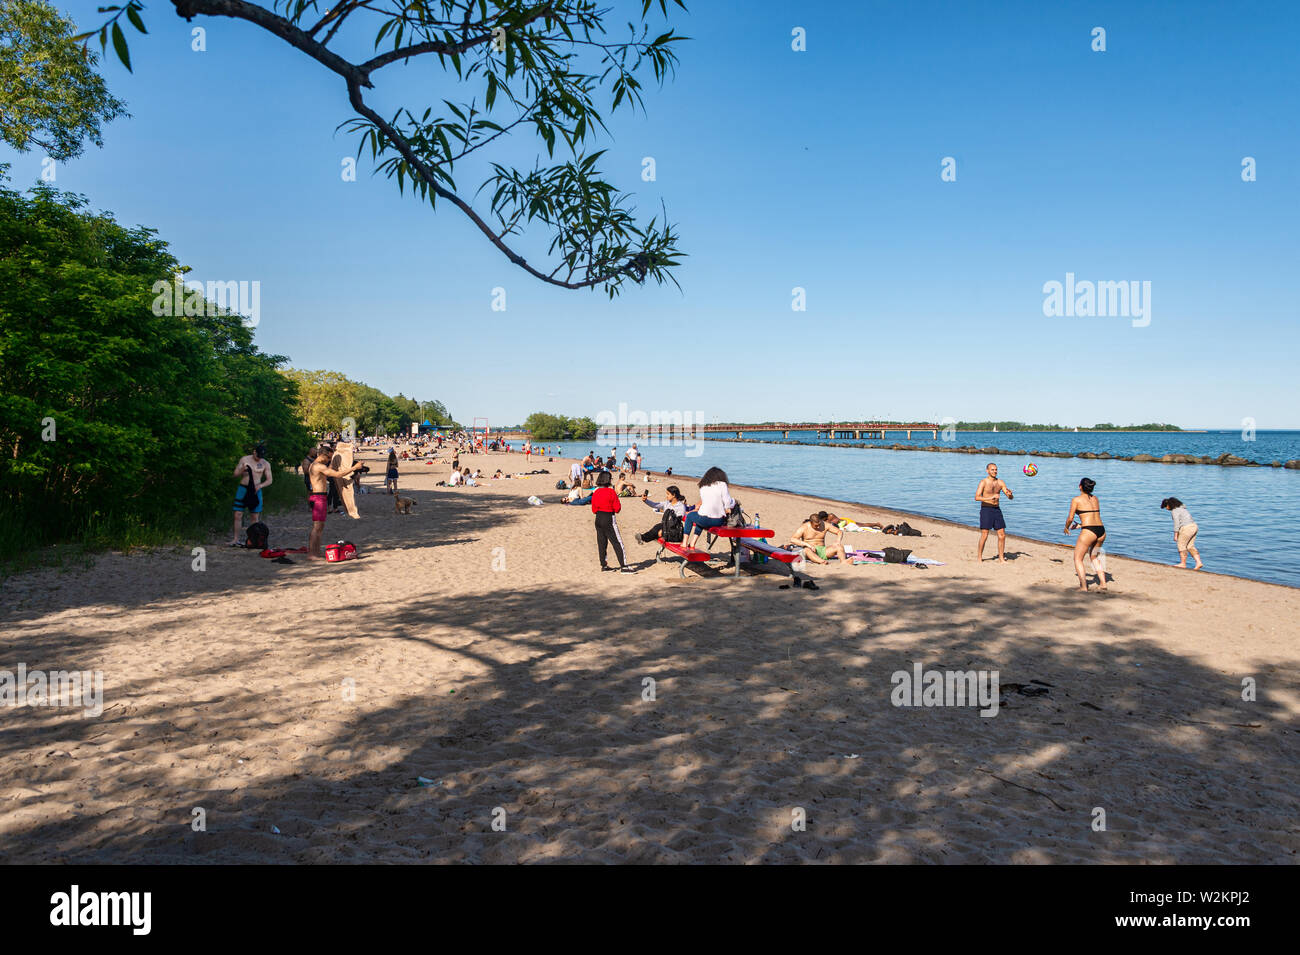 Toronto, CA - 23 June 2019: People enjoying a warm summer day at the beach on Centre island. Stock Photo